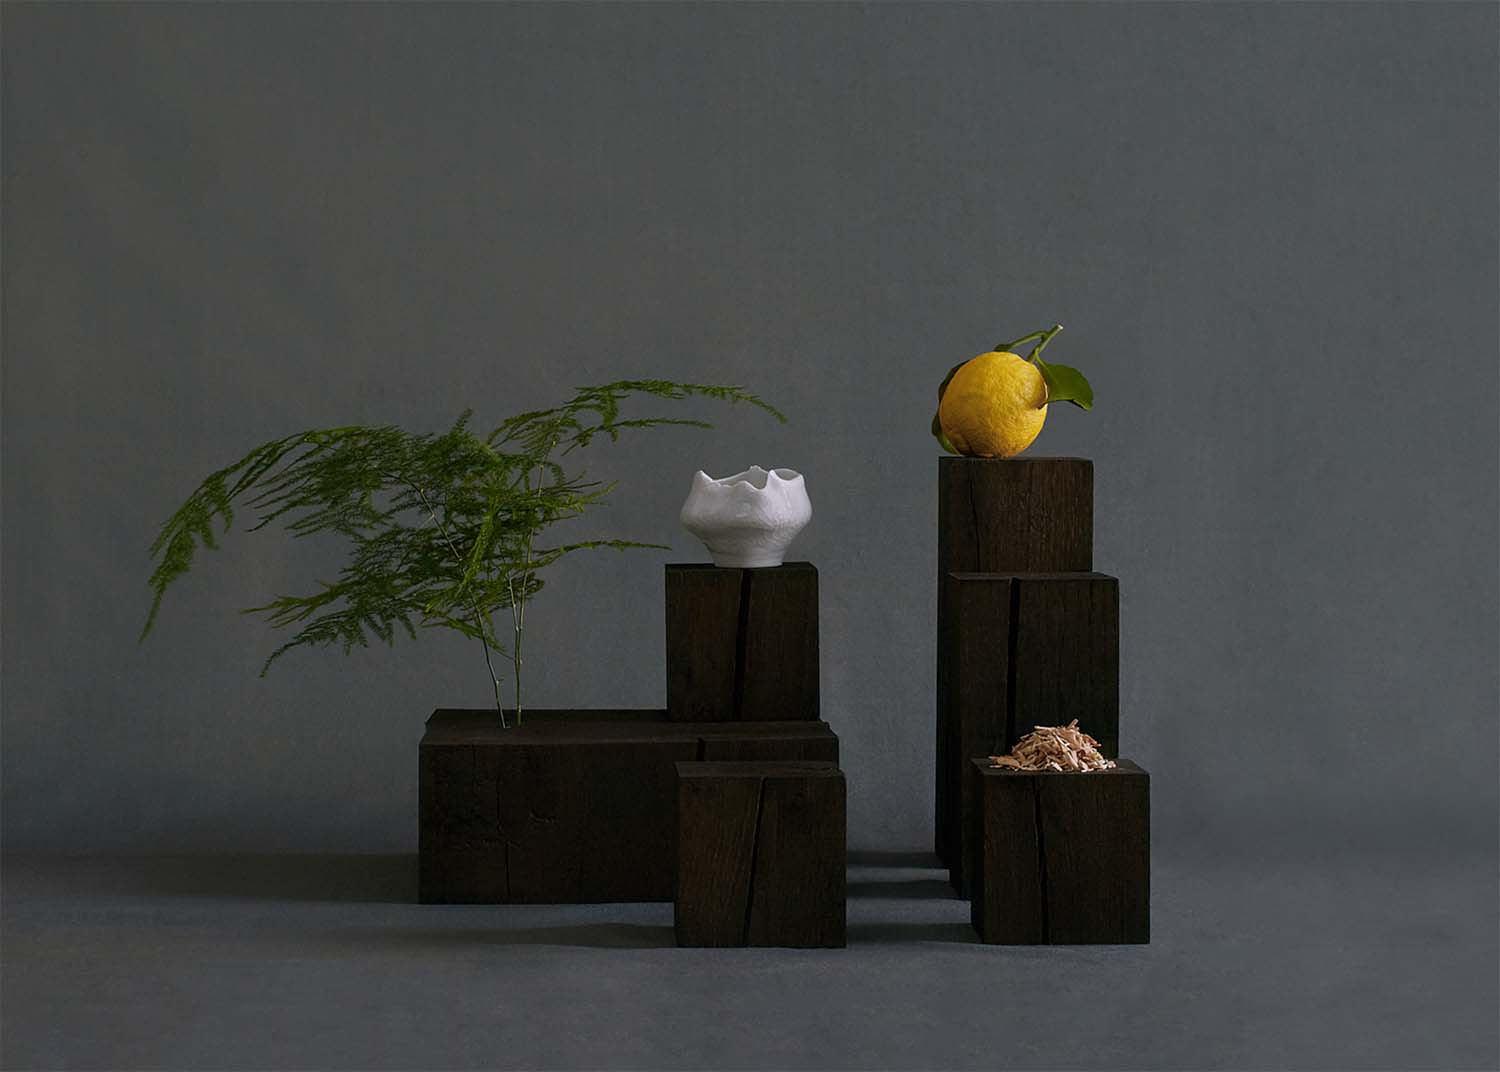 Solid cedar wood cubes stacked in different levels with a lemon, sandalwood splinters, a hand-made ceramic bowl, and branches mimicking a tree